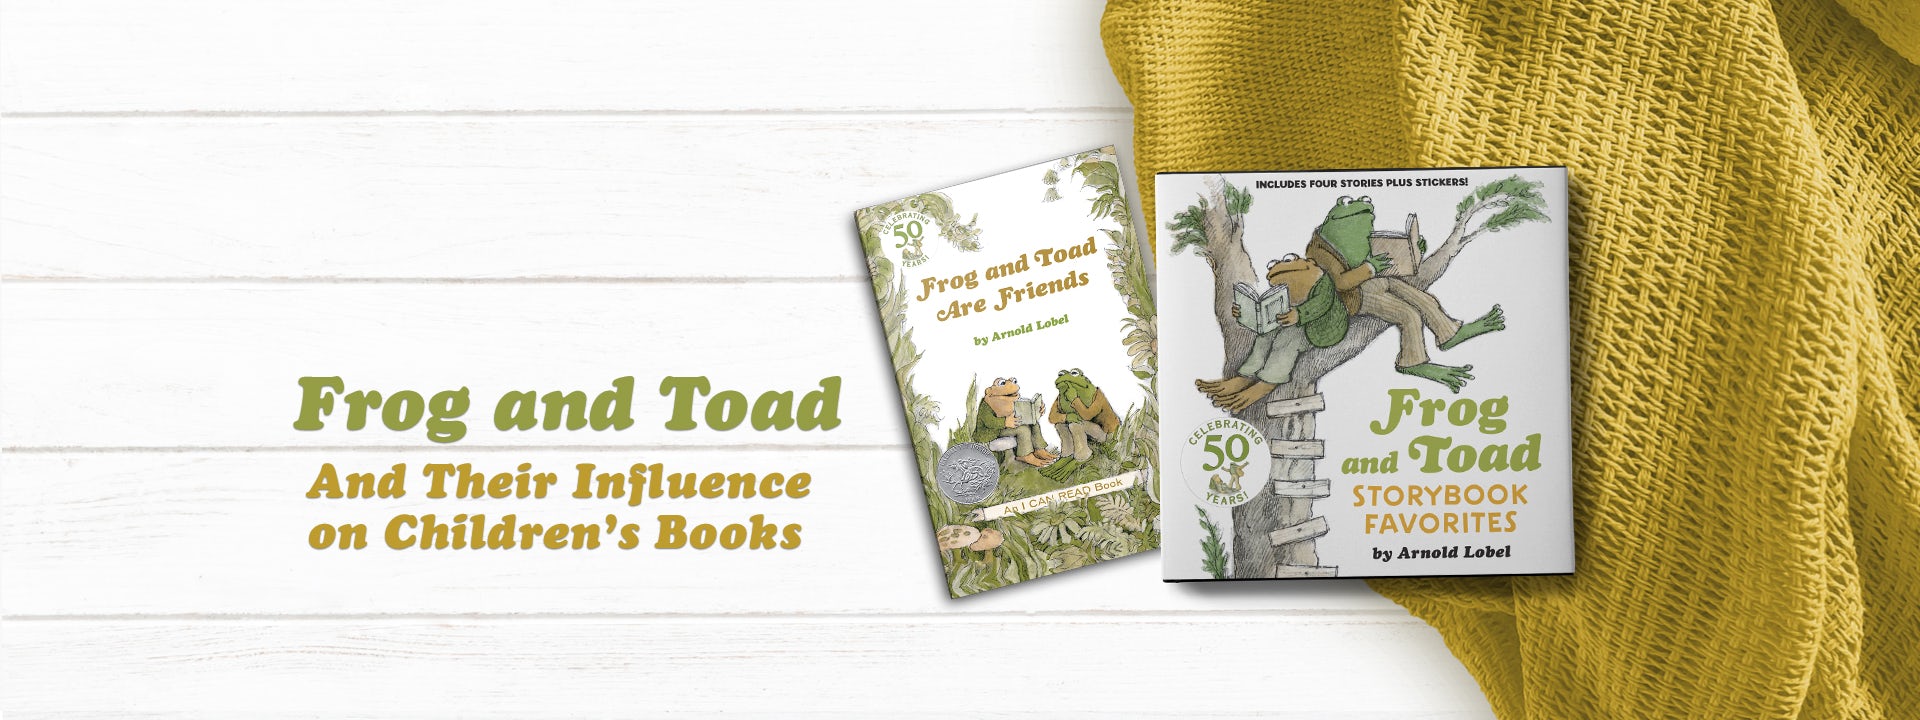 Frog and Toad’s Decades-Long Influence on Children’s Books